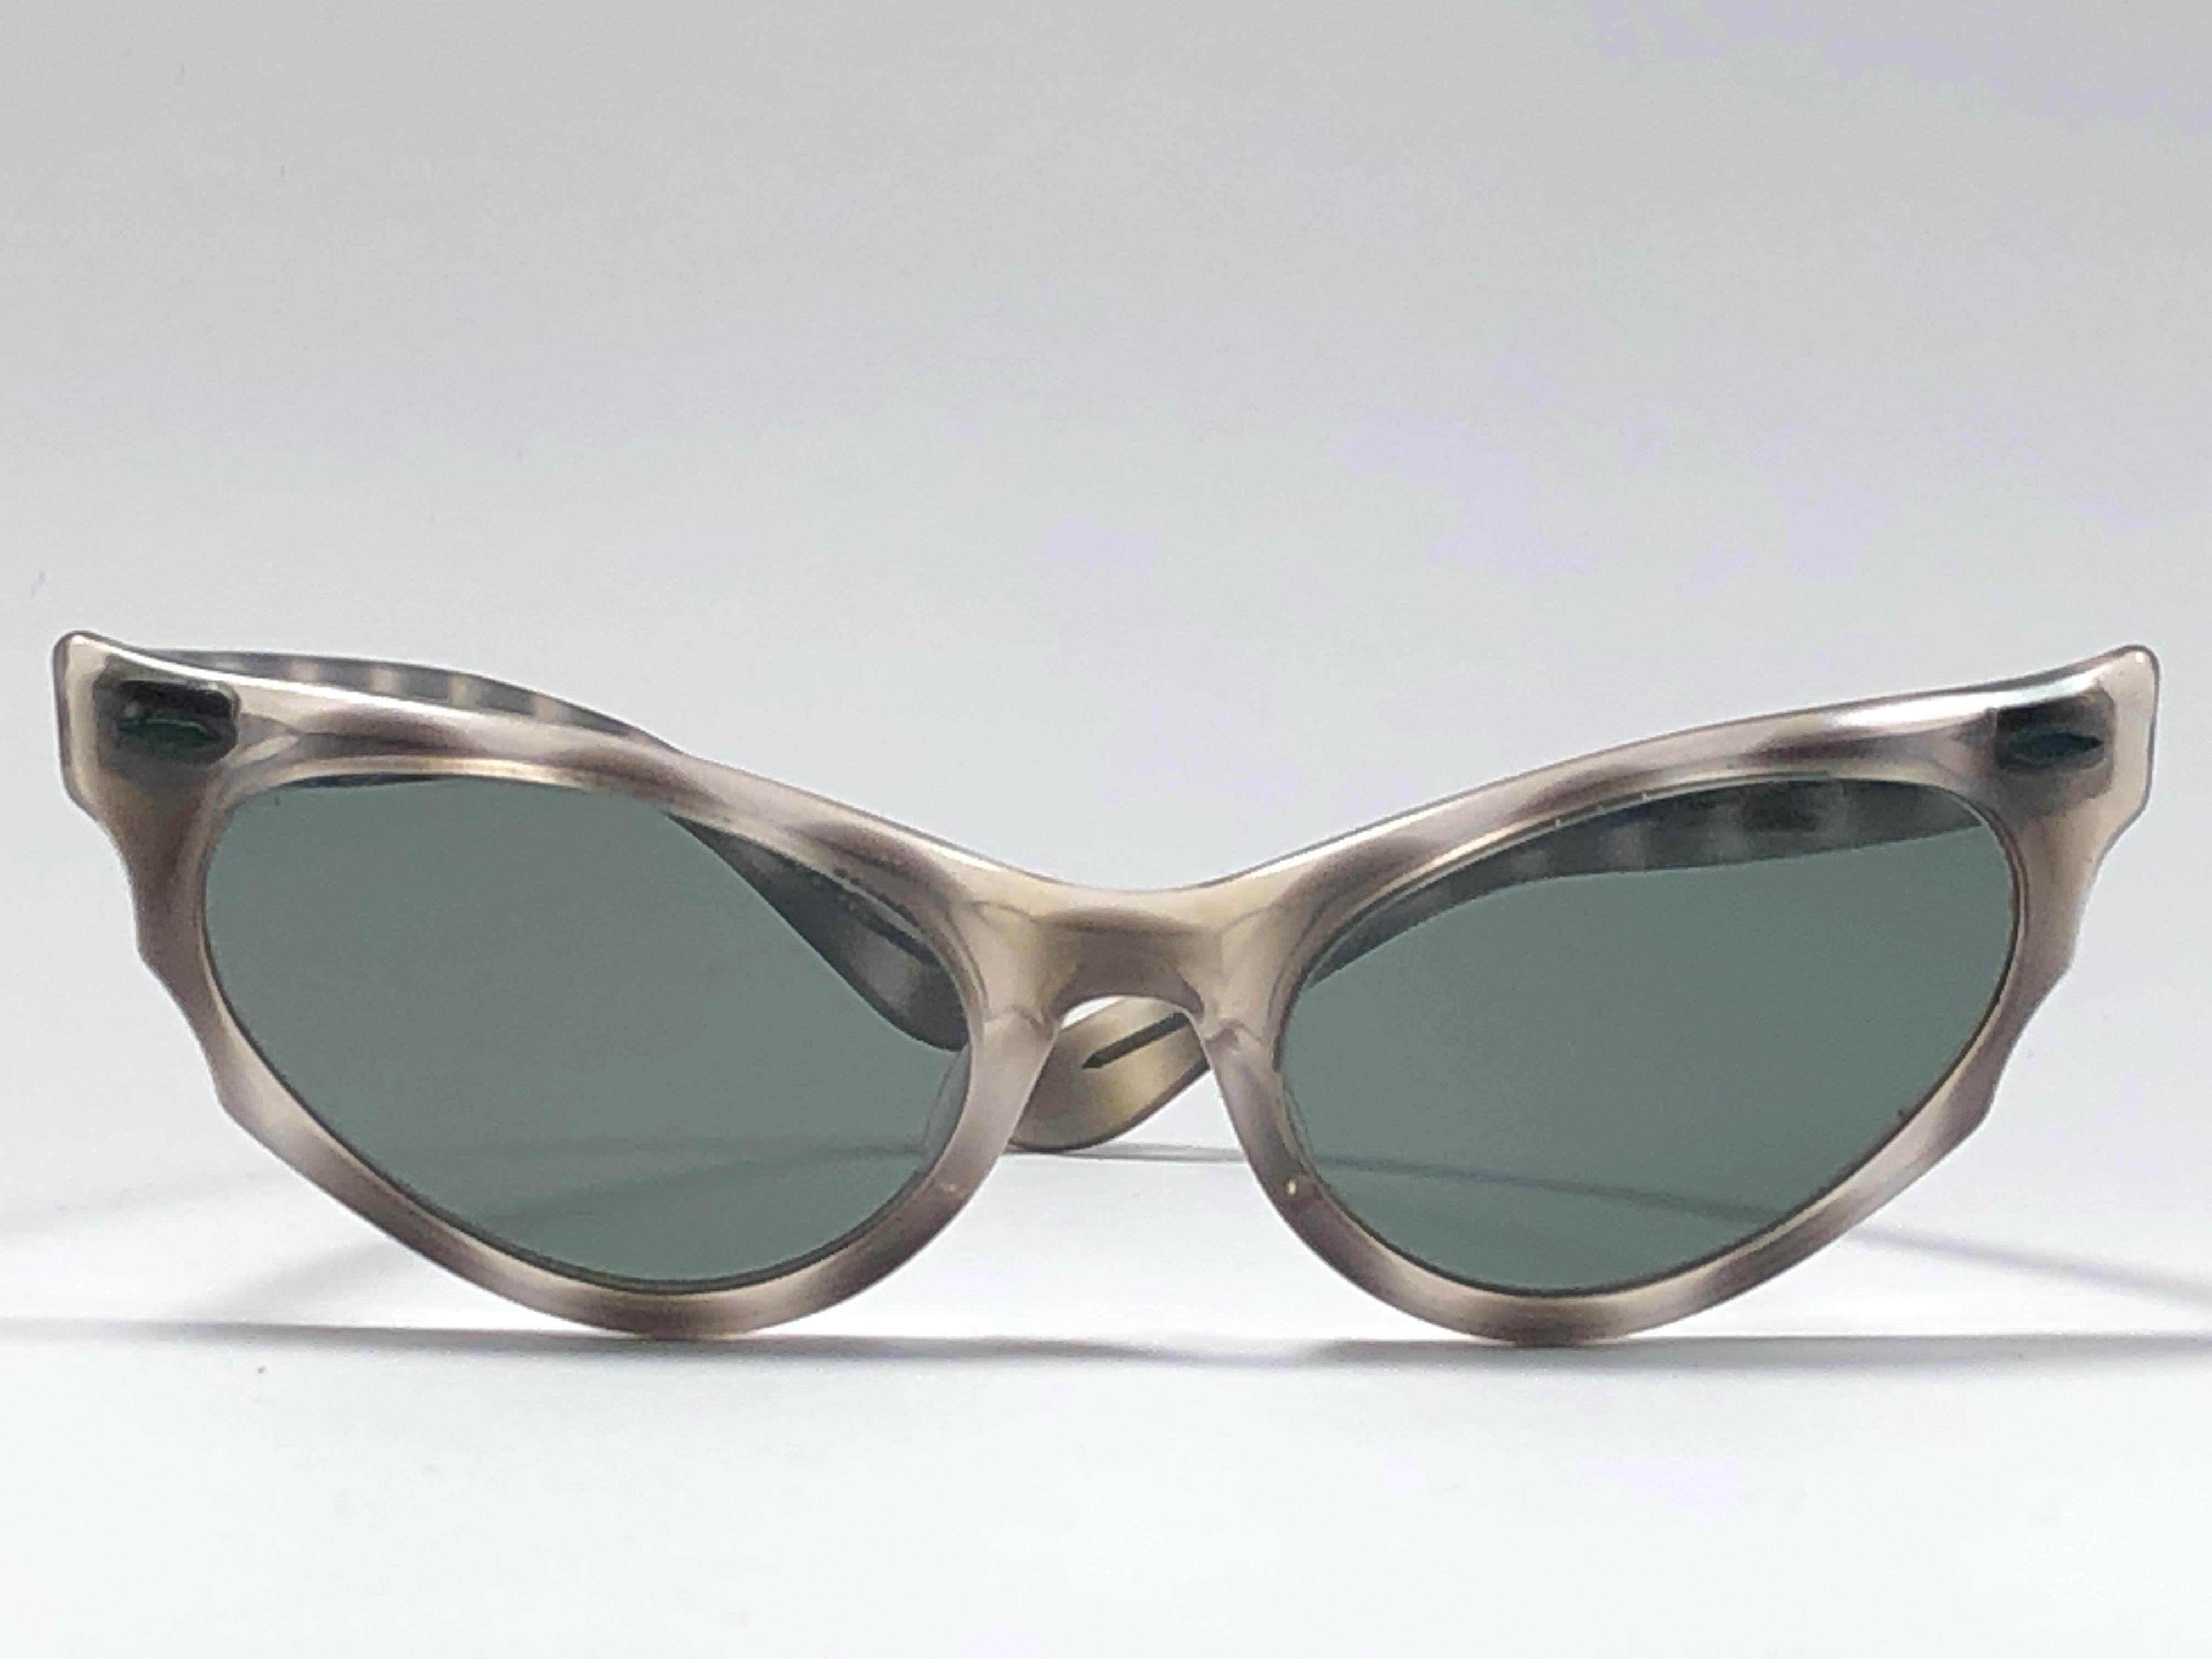 Super Rare 1950's Ray Ban Alora cat eyed frame

Straight out of the 1950's. All hallmarks. Minor sign of wear due to 70 years of storage. 

A Piece of sunglasses history.